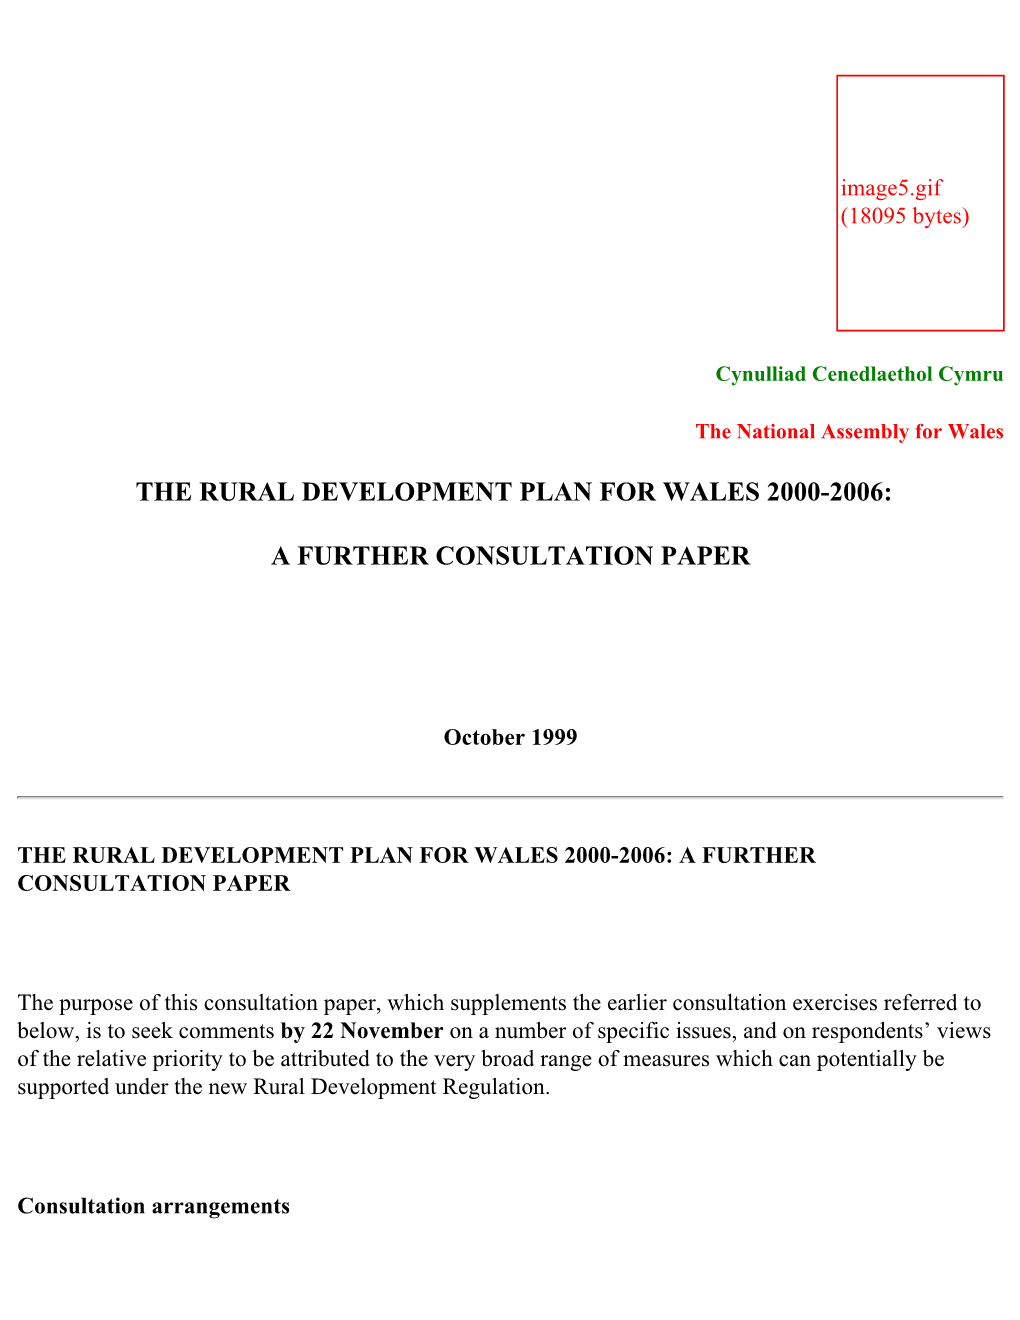 The Rural Development Plan for Wales 2000-2006